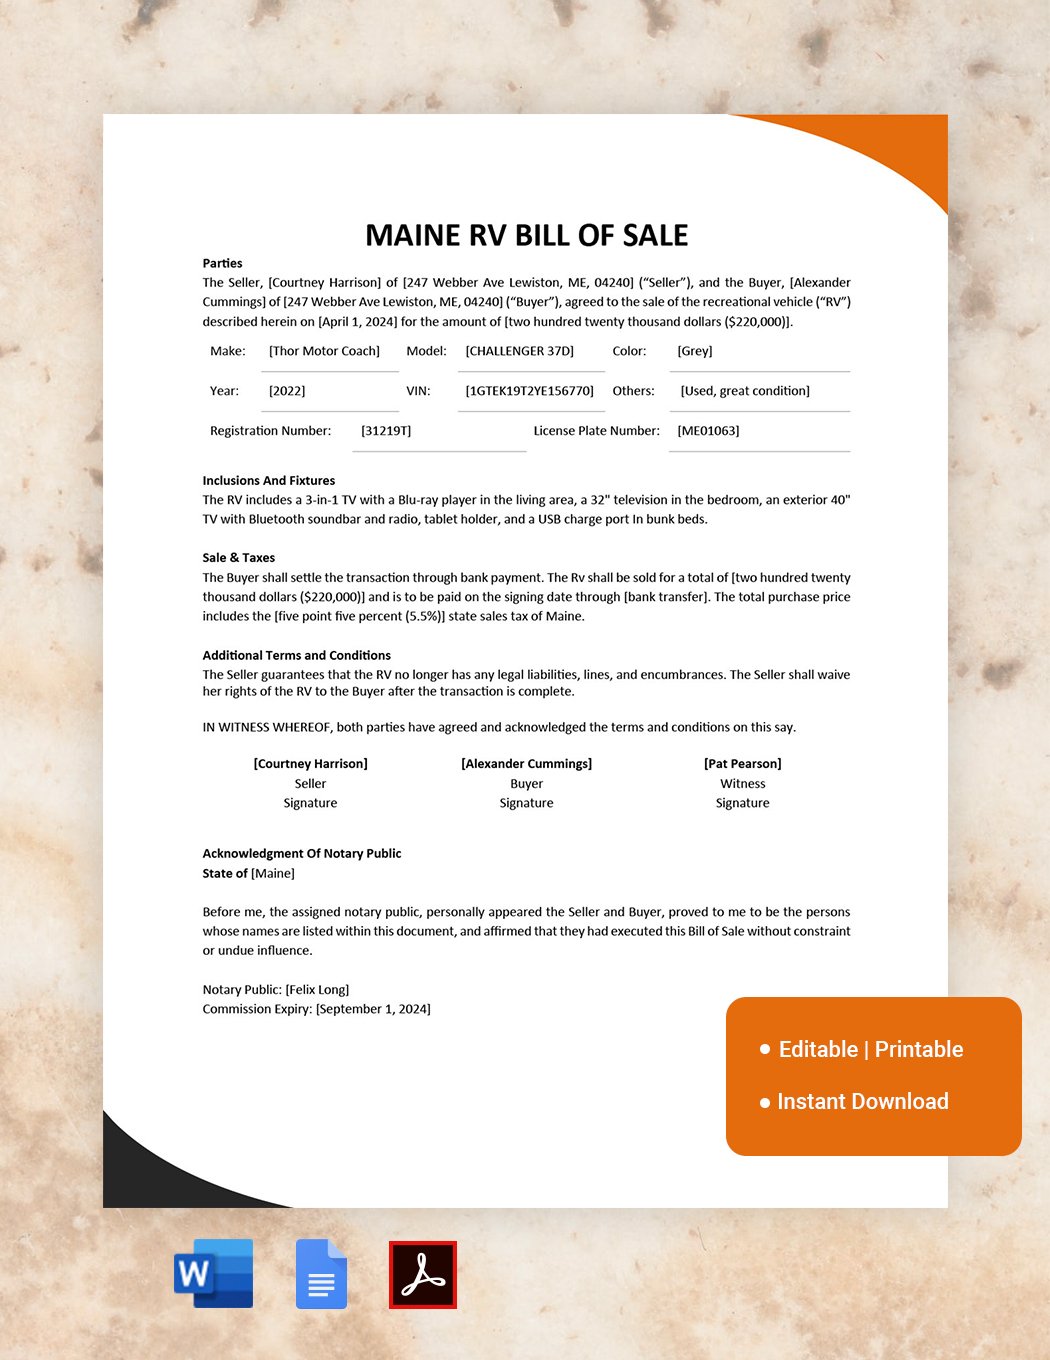 Maine RV Bill of Sale Template in Word, Google Docs, PDF, Apple Pages